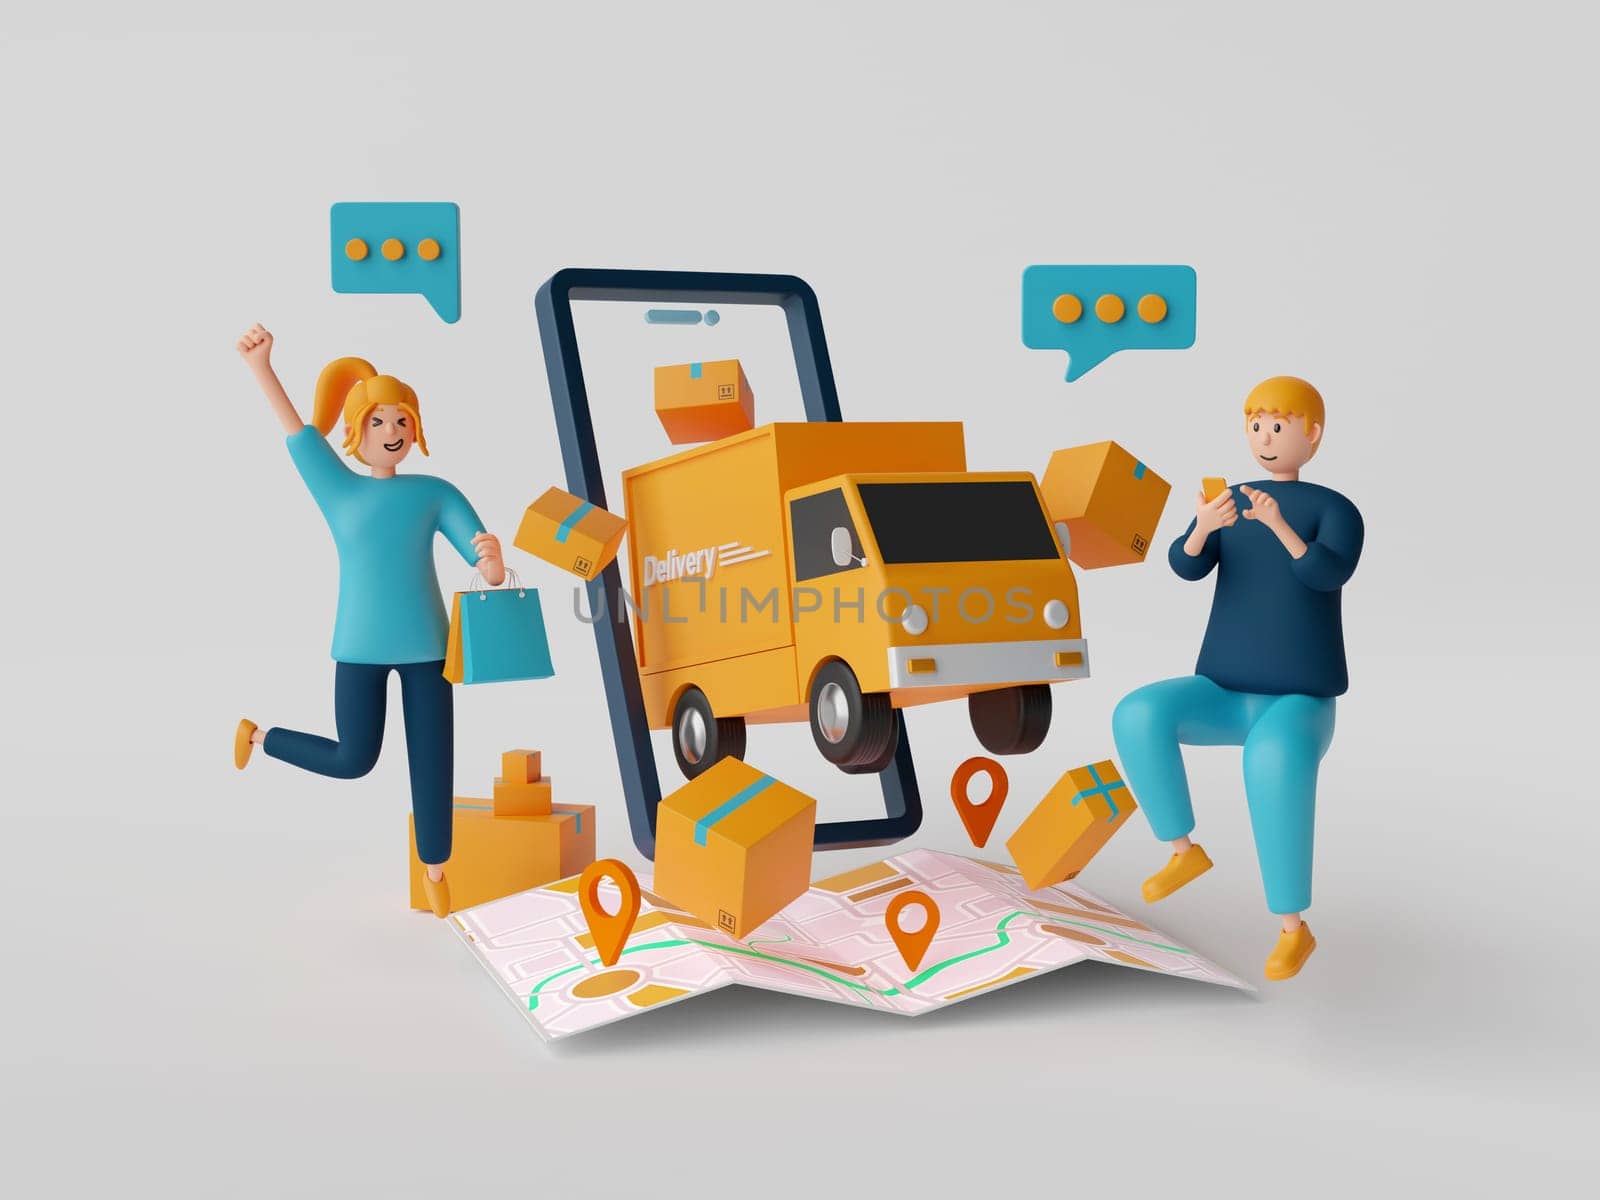 3d illustration of businessman character shopping online via application on smartphone with shopping item. Transportation shipment delivery by truck. by nutzchotwarut